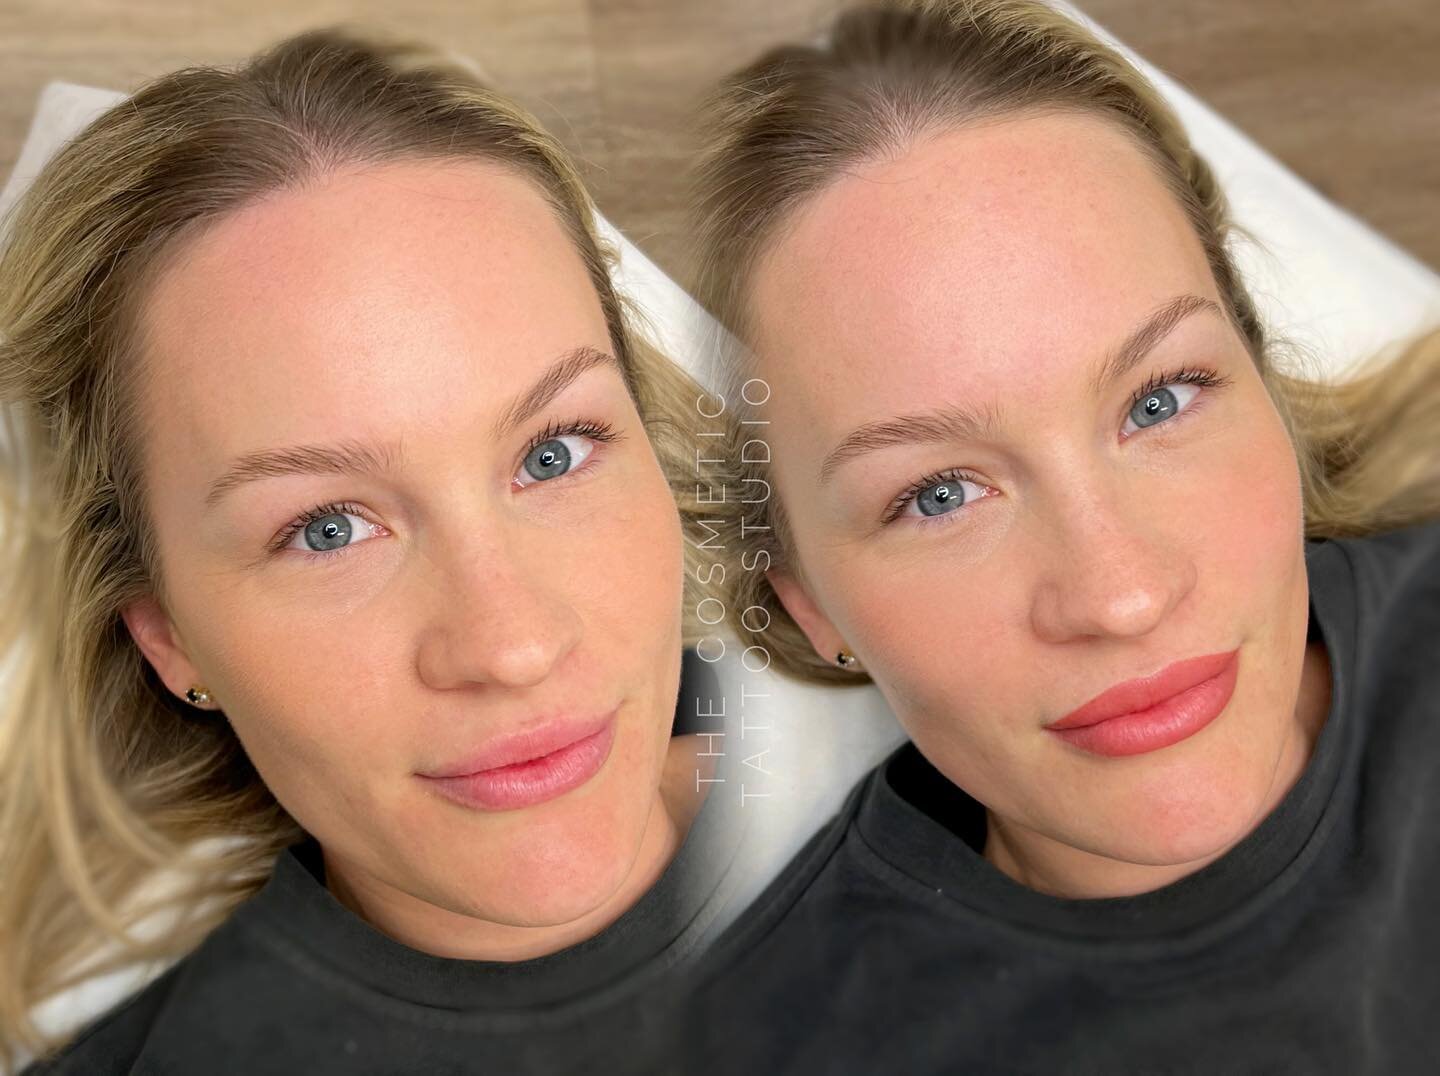 Before and after lip blush tattoo 🌸✨

Adding definition and a hint of colour to these beautiful lips! The colour will soften and fade approx 50% in the first week to leave a stunning natural tint 💕

Artist: Bodi

Using @permablend_pigments in Tres 